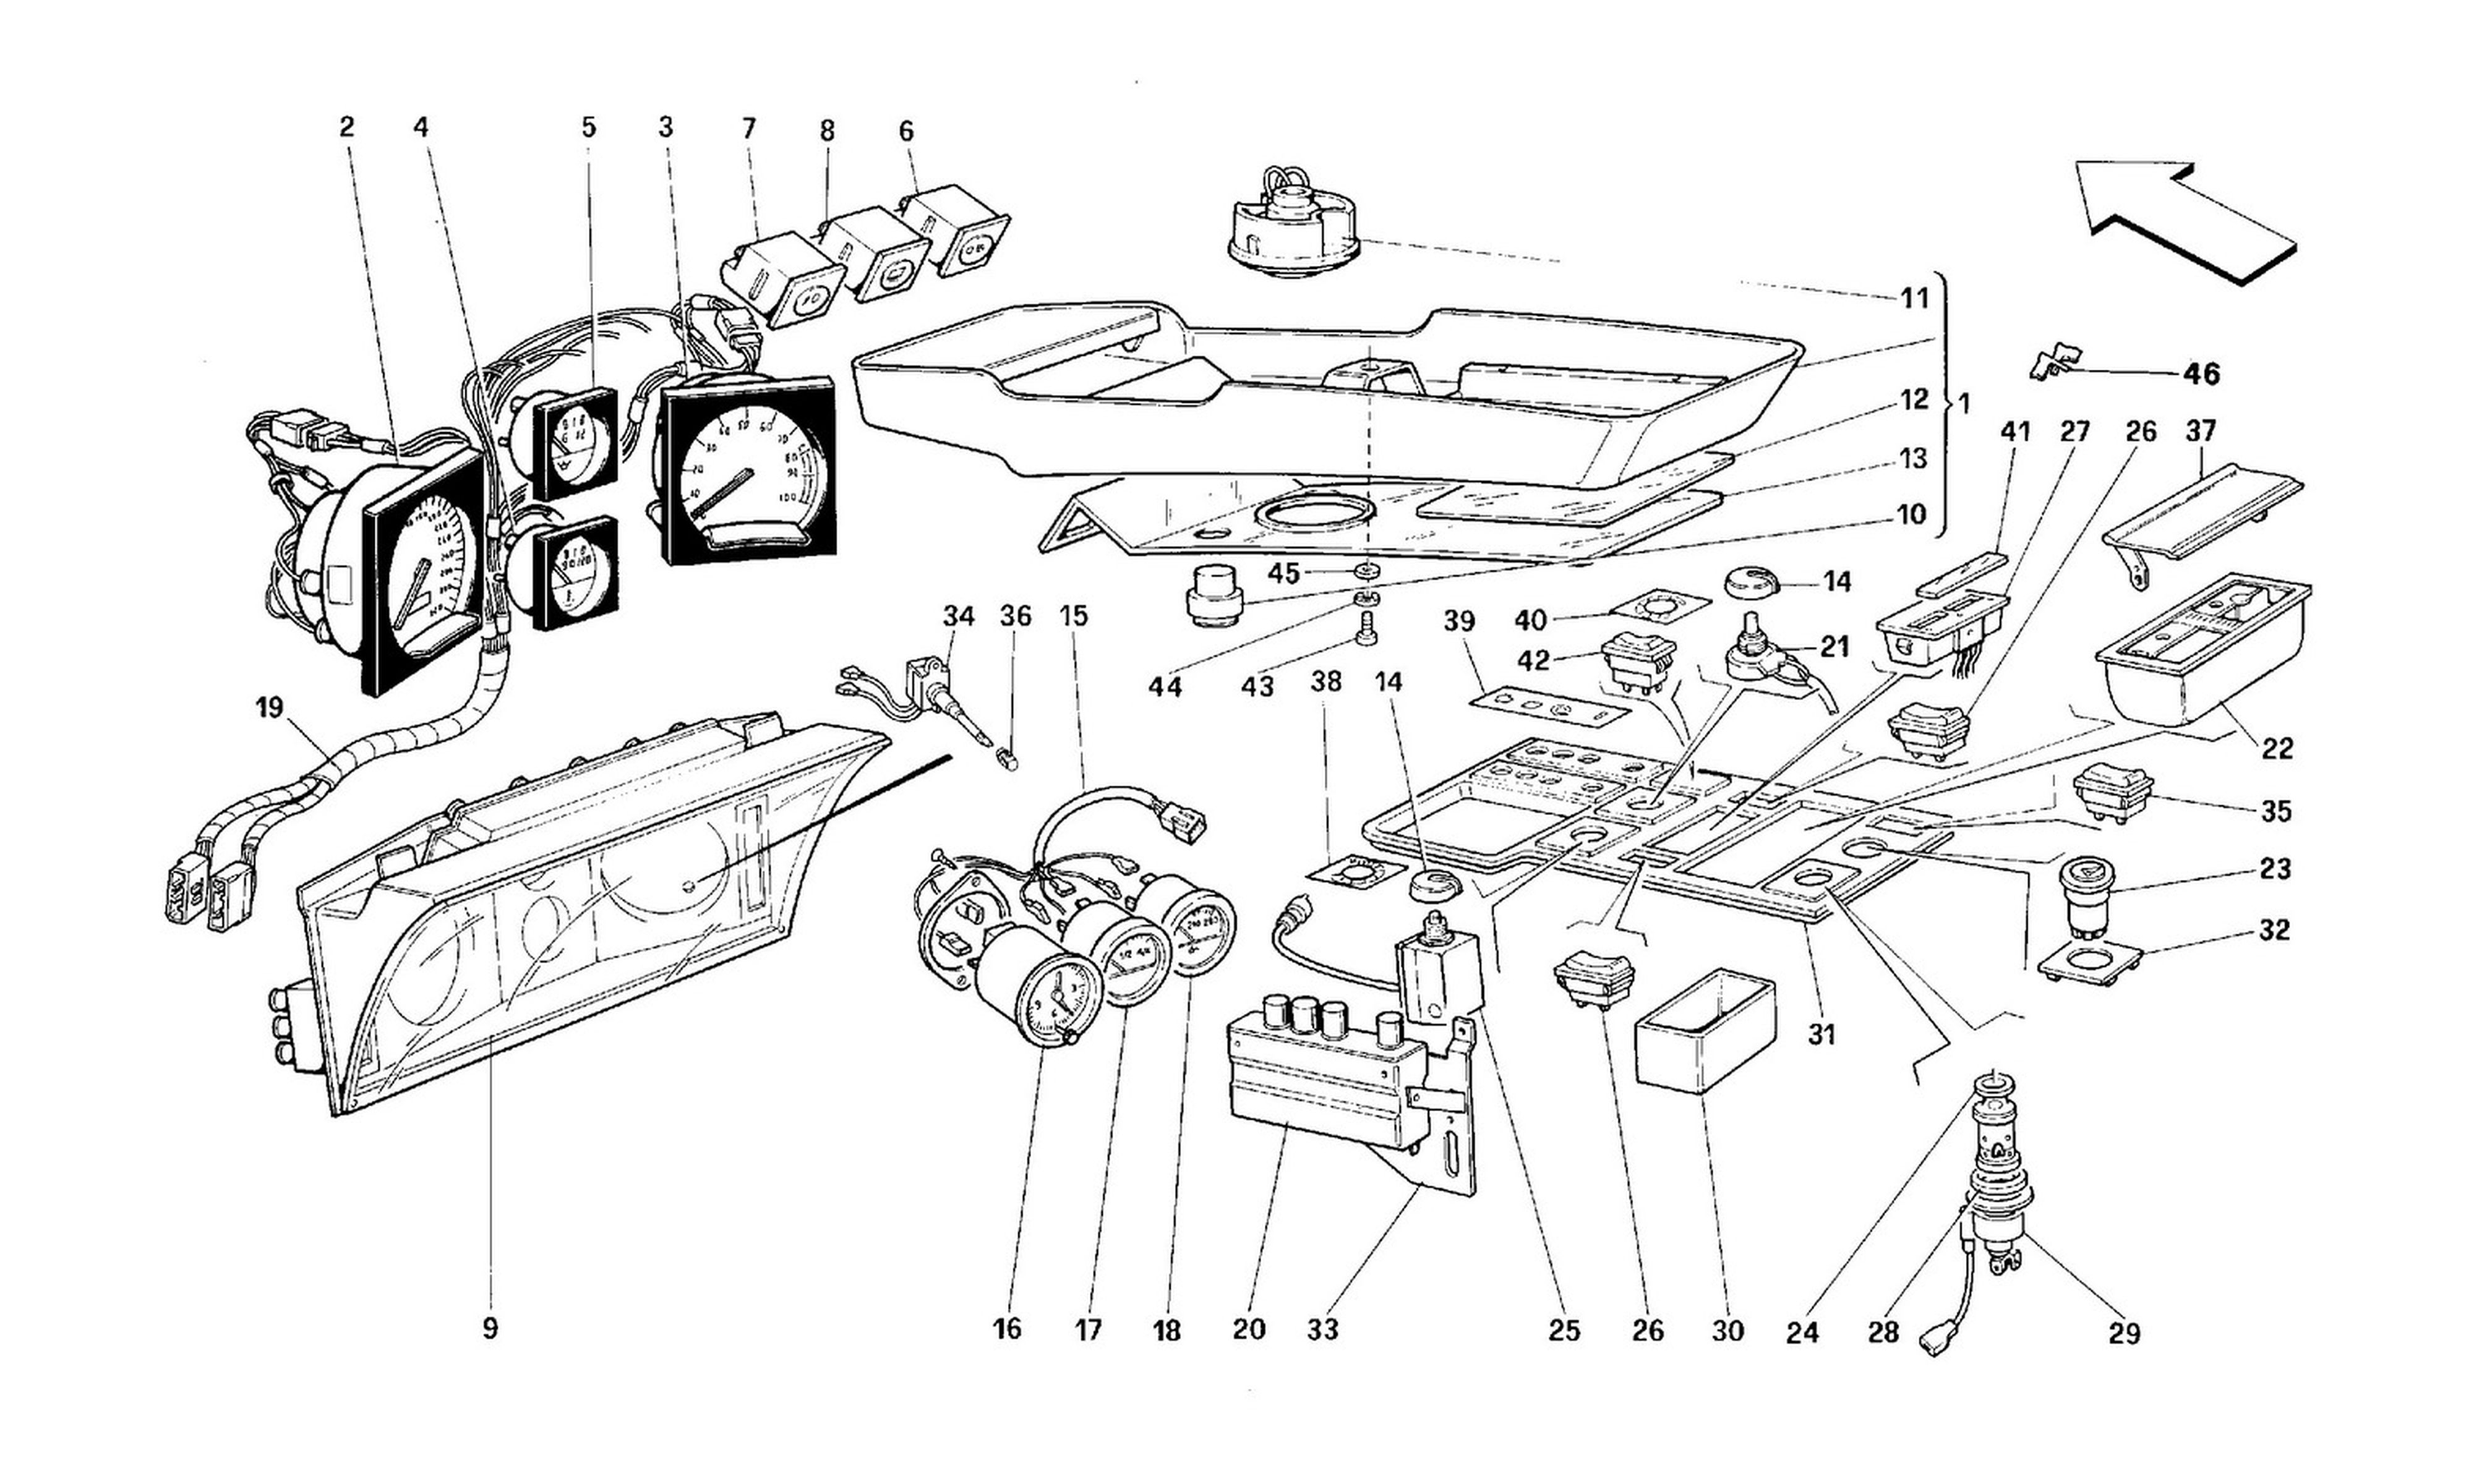 Schematic: Instruments And Passenger Compartment Accessories